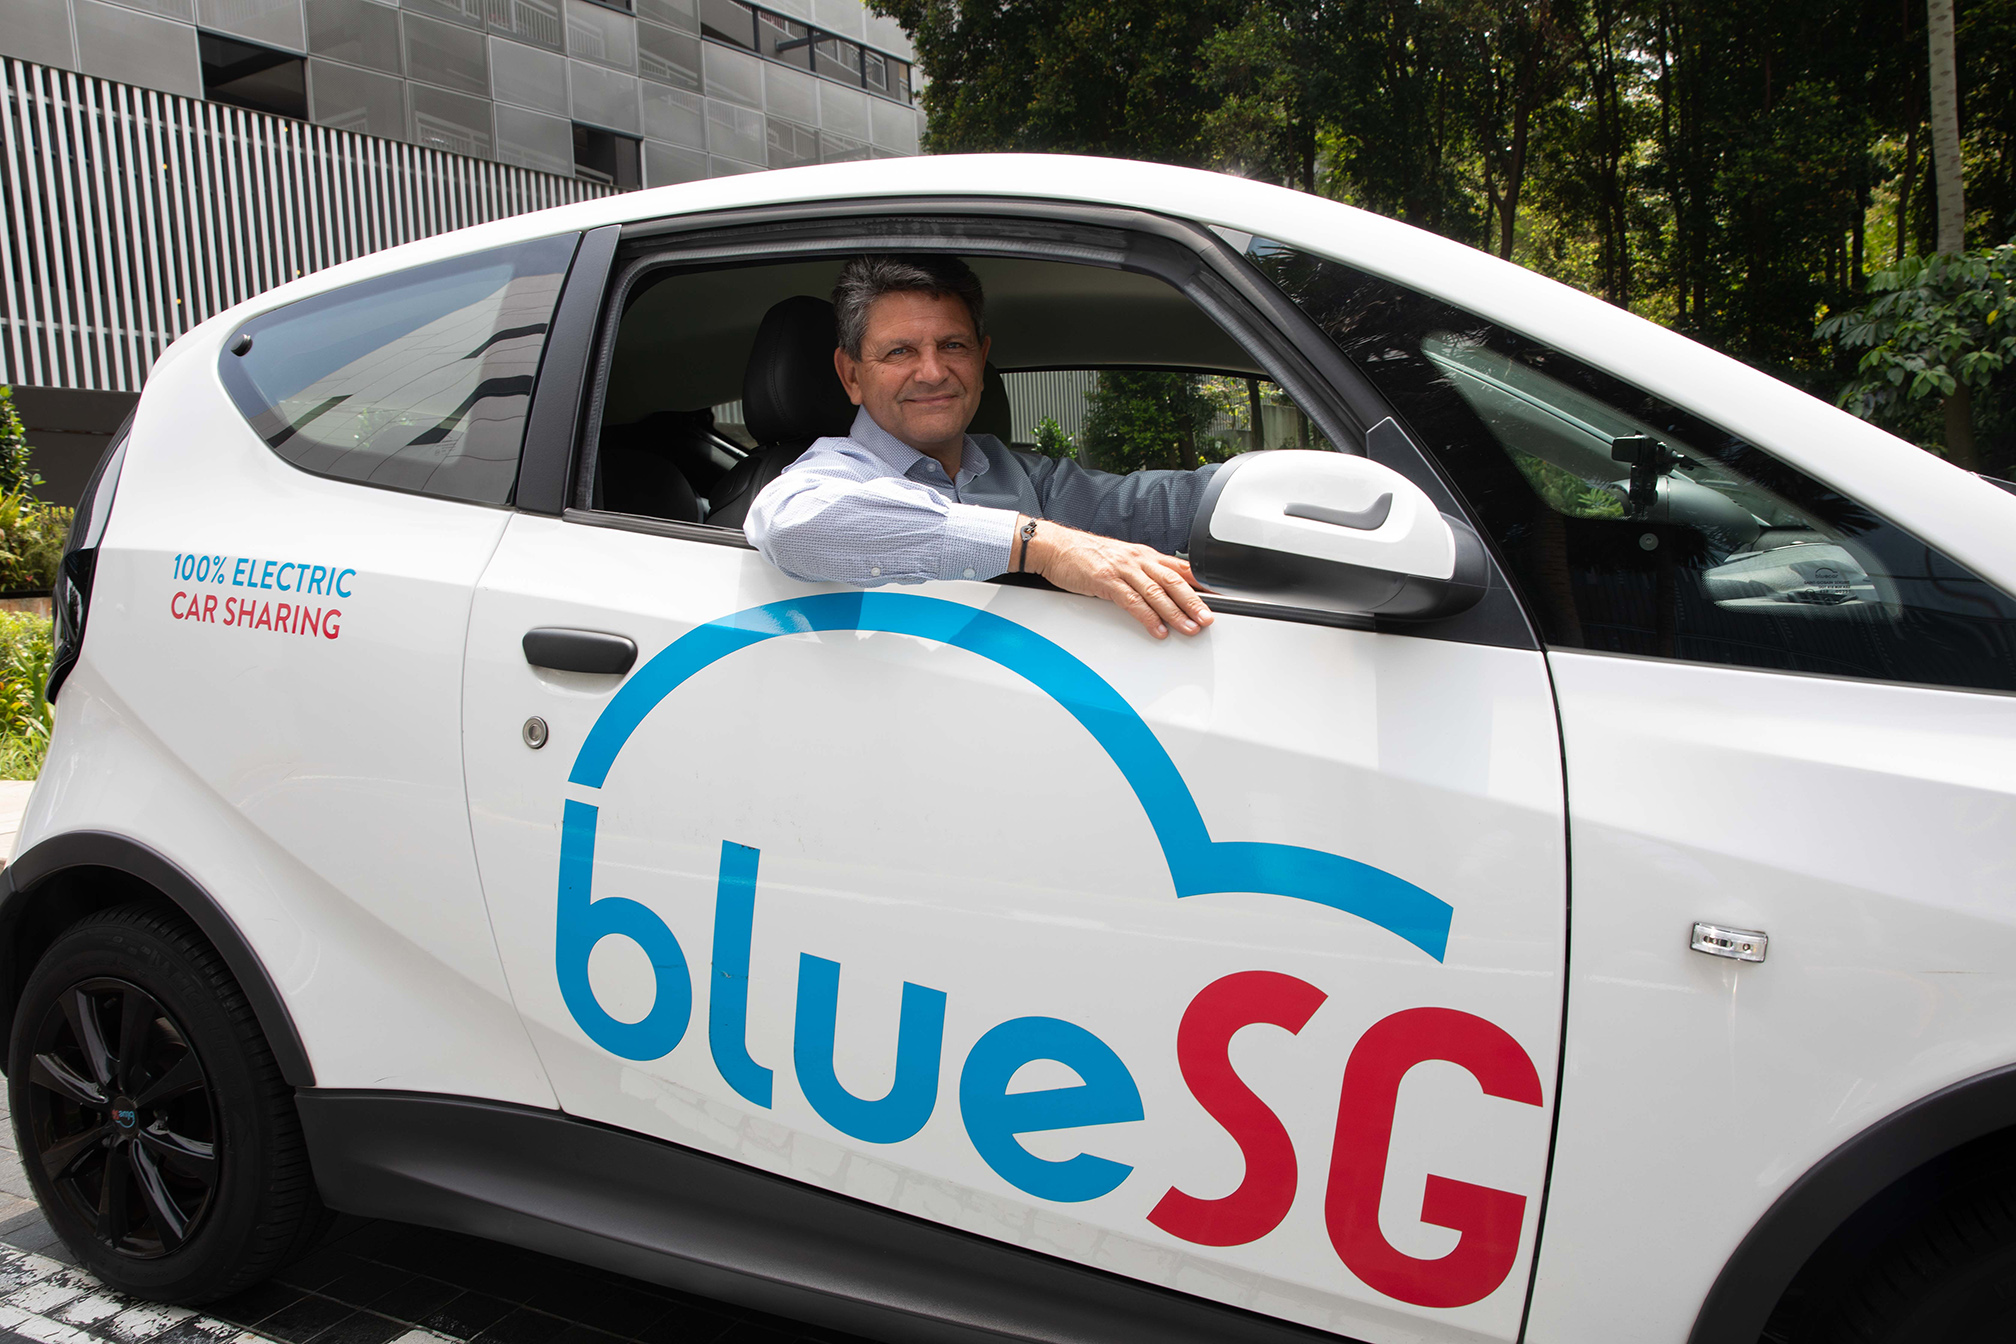 Mr Franck Vitte, managing director of car-sharing firm BlueSG, told TODAY that about 50 per cent of spaces that they had selected to build a station with four slow 3.7kW AC charging points were rejected by the authorities. BlueSG currently runs a fleet of